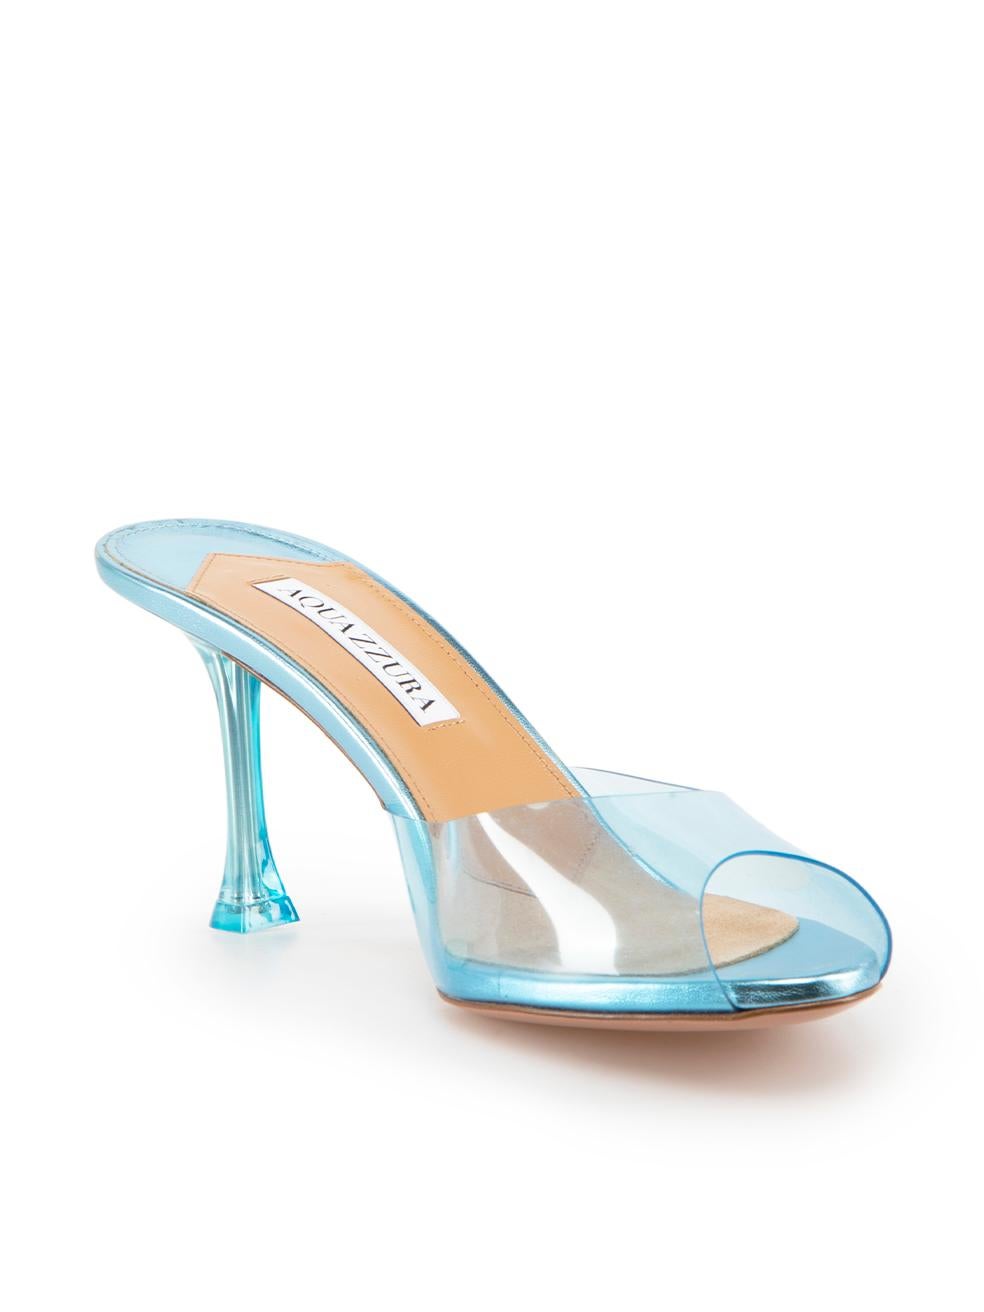 CONDITION is Never worn. No visible wear to sandals is evident on this new Aquazzura designer resale item. This item comes with original dust bag.

Details
Blue
PVC
Heeled sandals
Slip on
Peep toe
Mid heel
Transparent
 
Made in Italy
